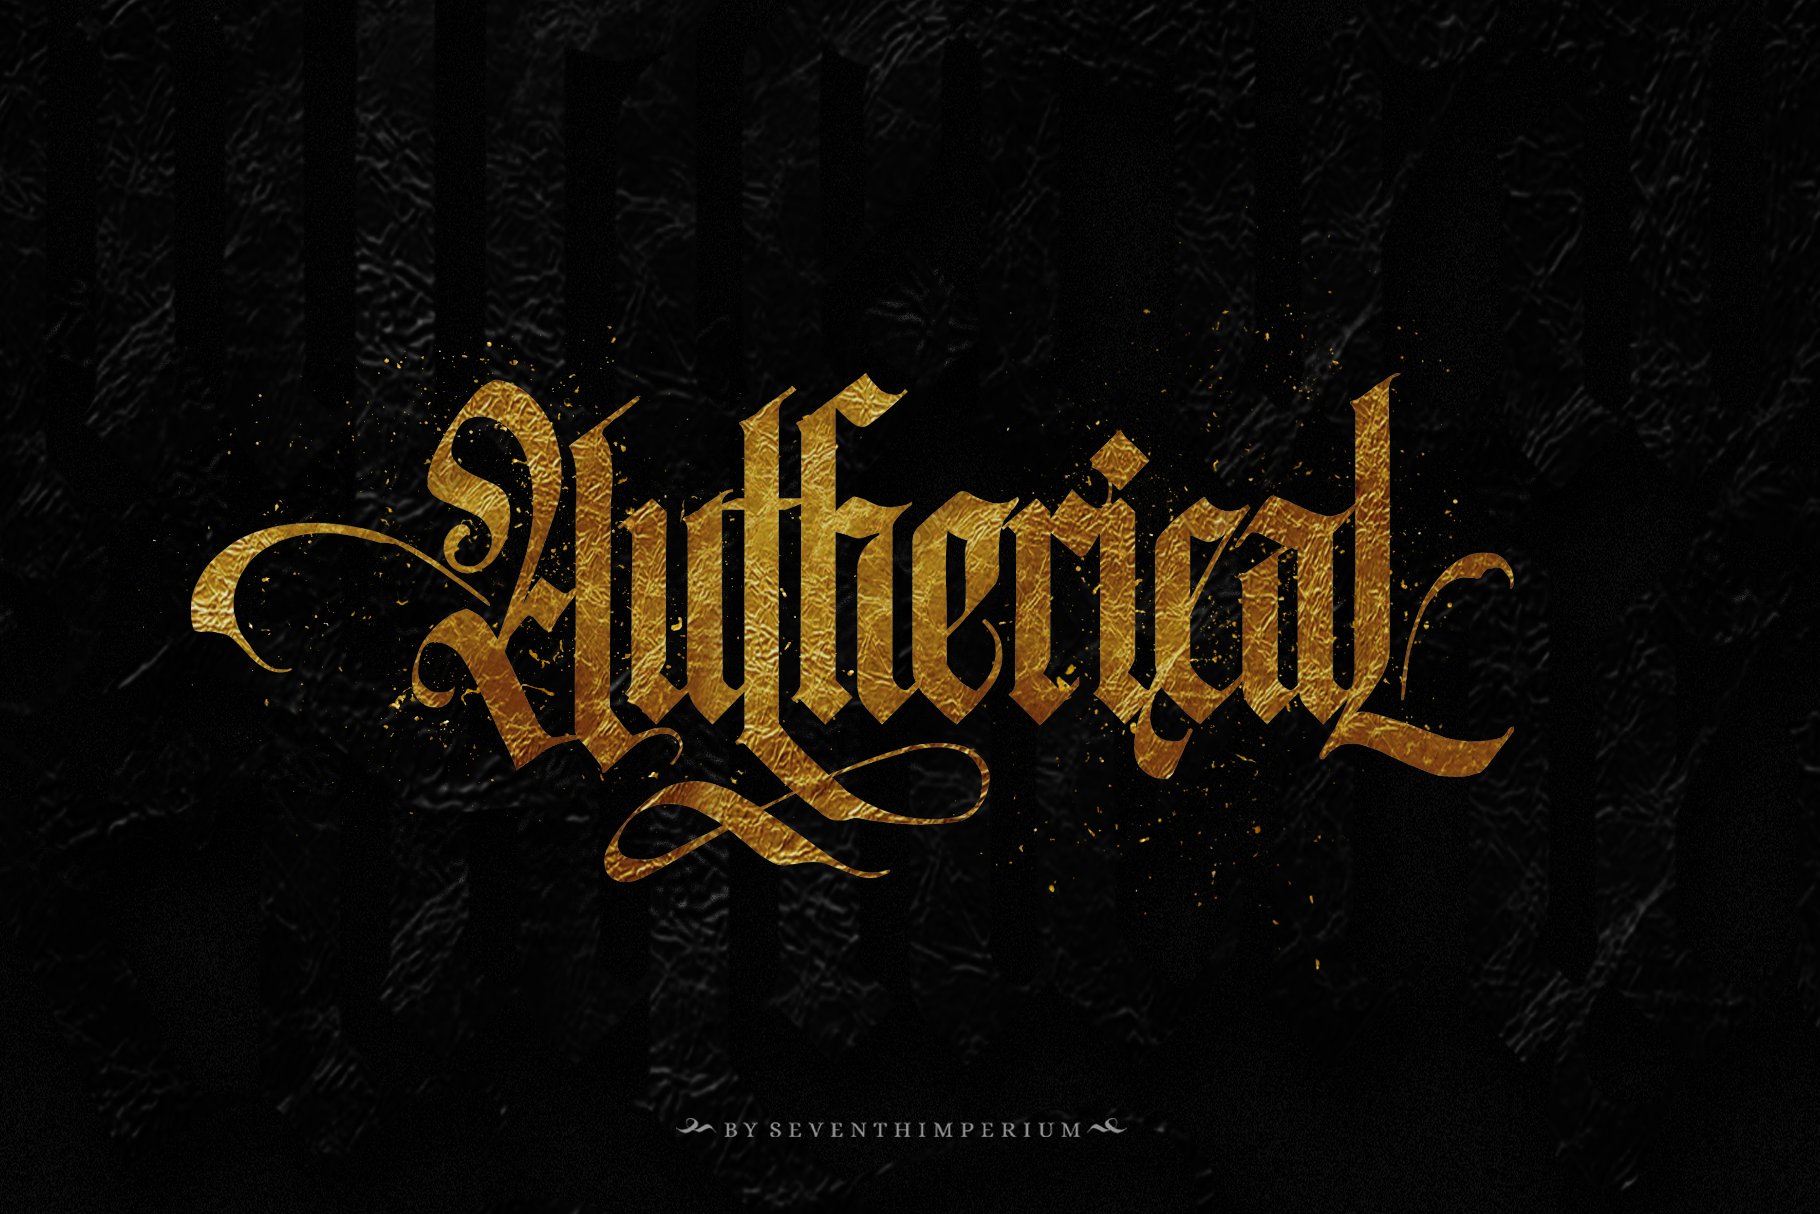 Autherical Typeface cover image.